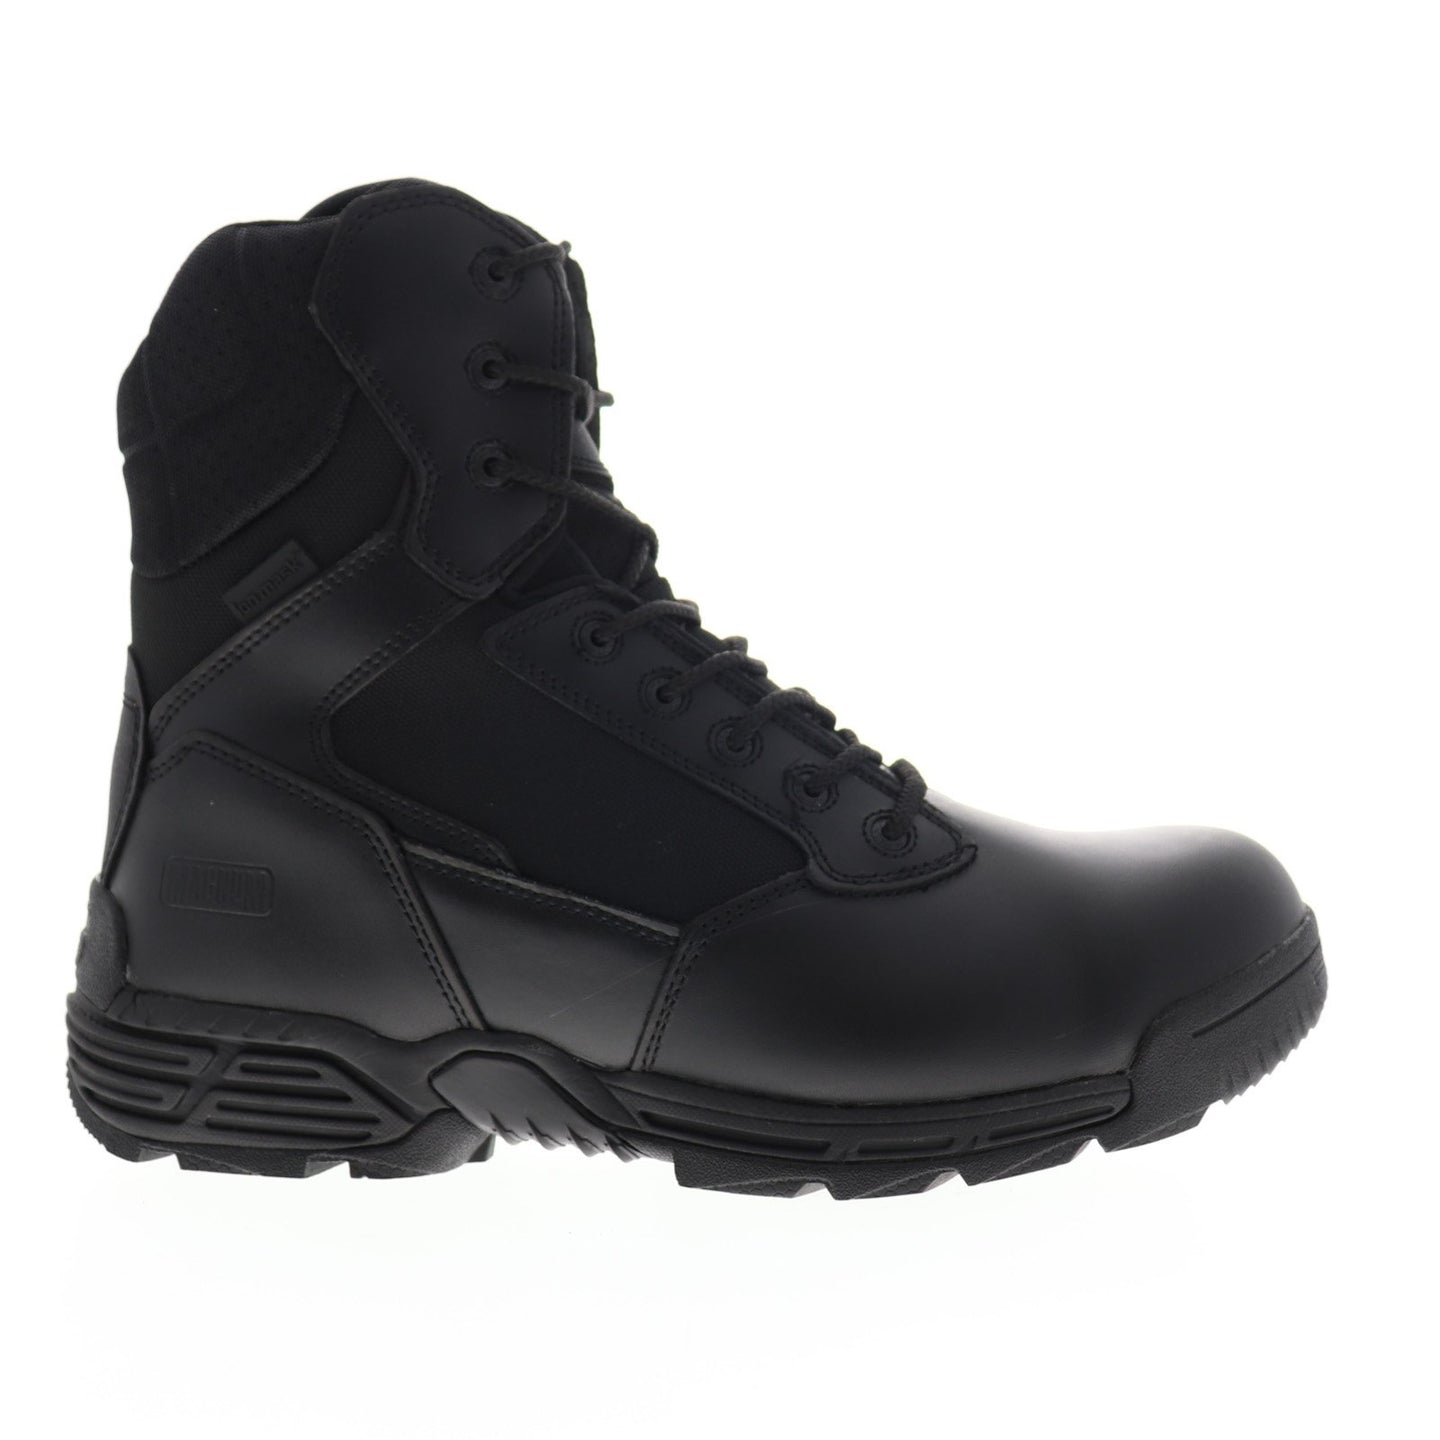 Magnum Stealth Force 8.0 SZ CT 5866 Mens Black Wide 2E Leather Tactica ...